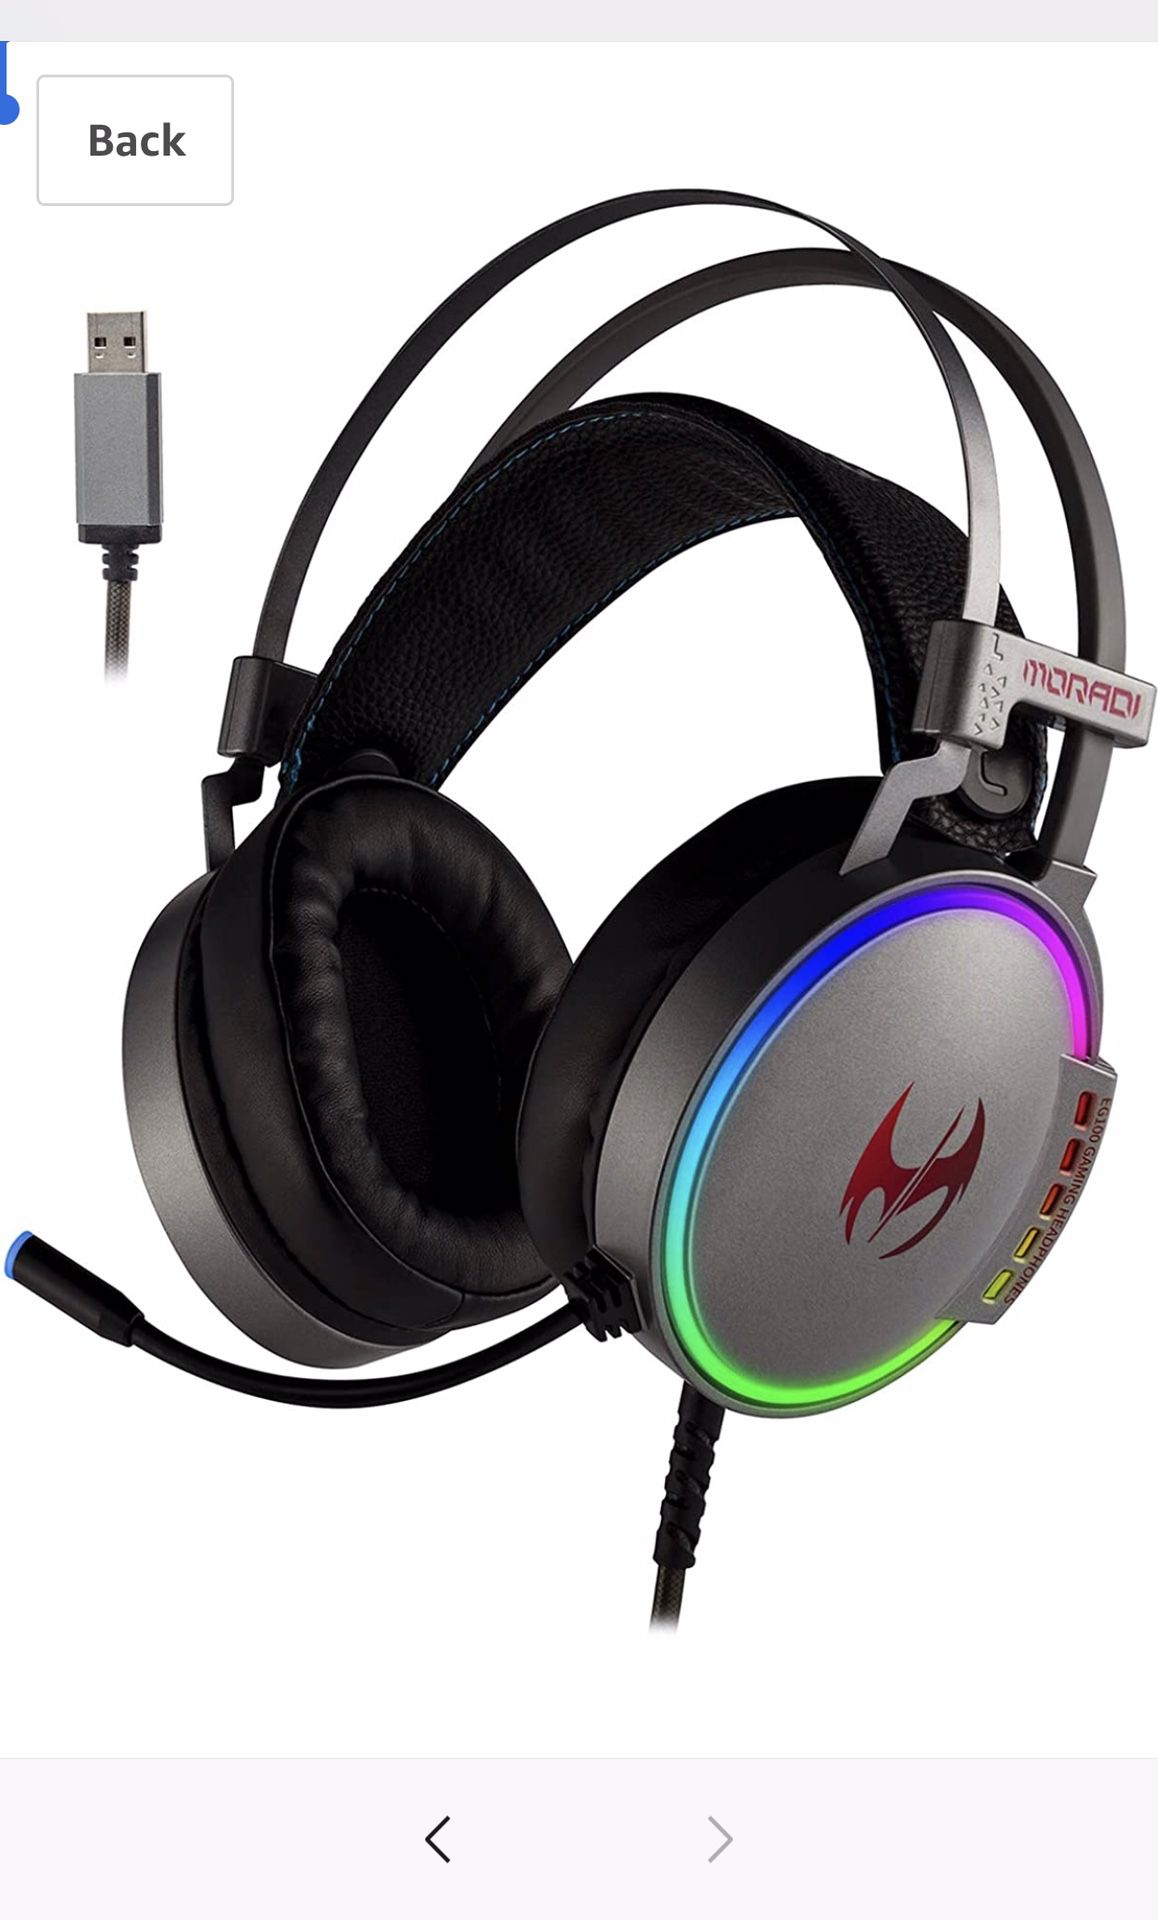 Usb gaming headset (silver)